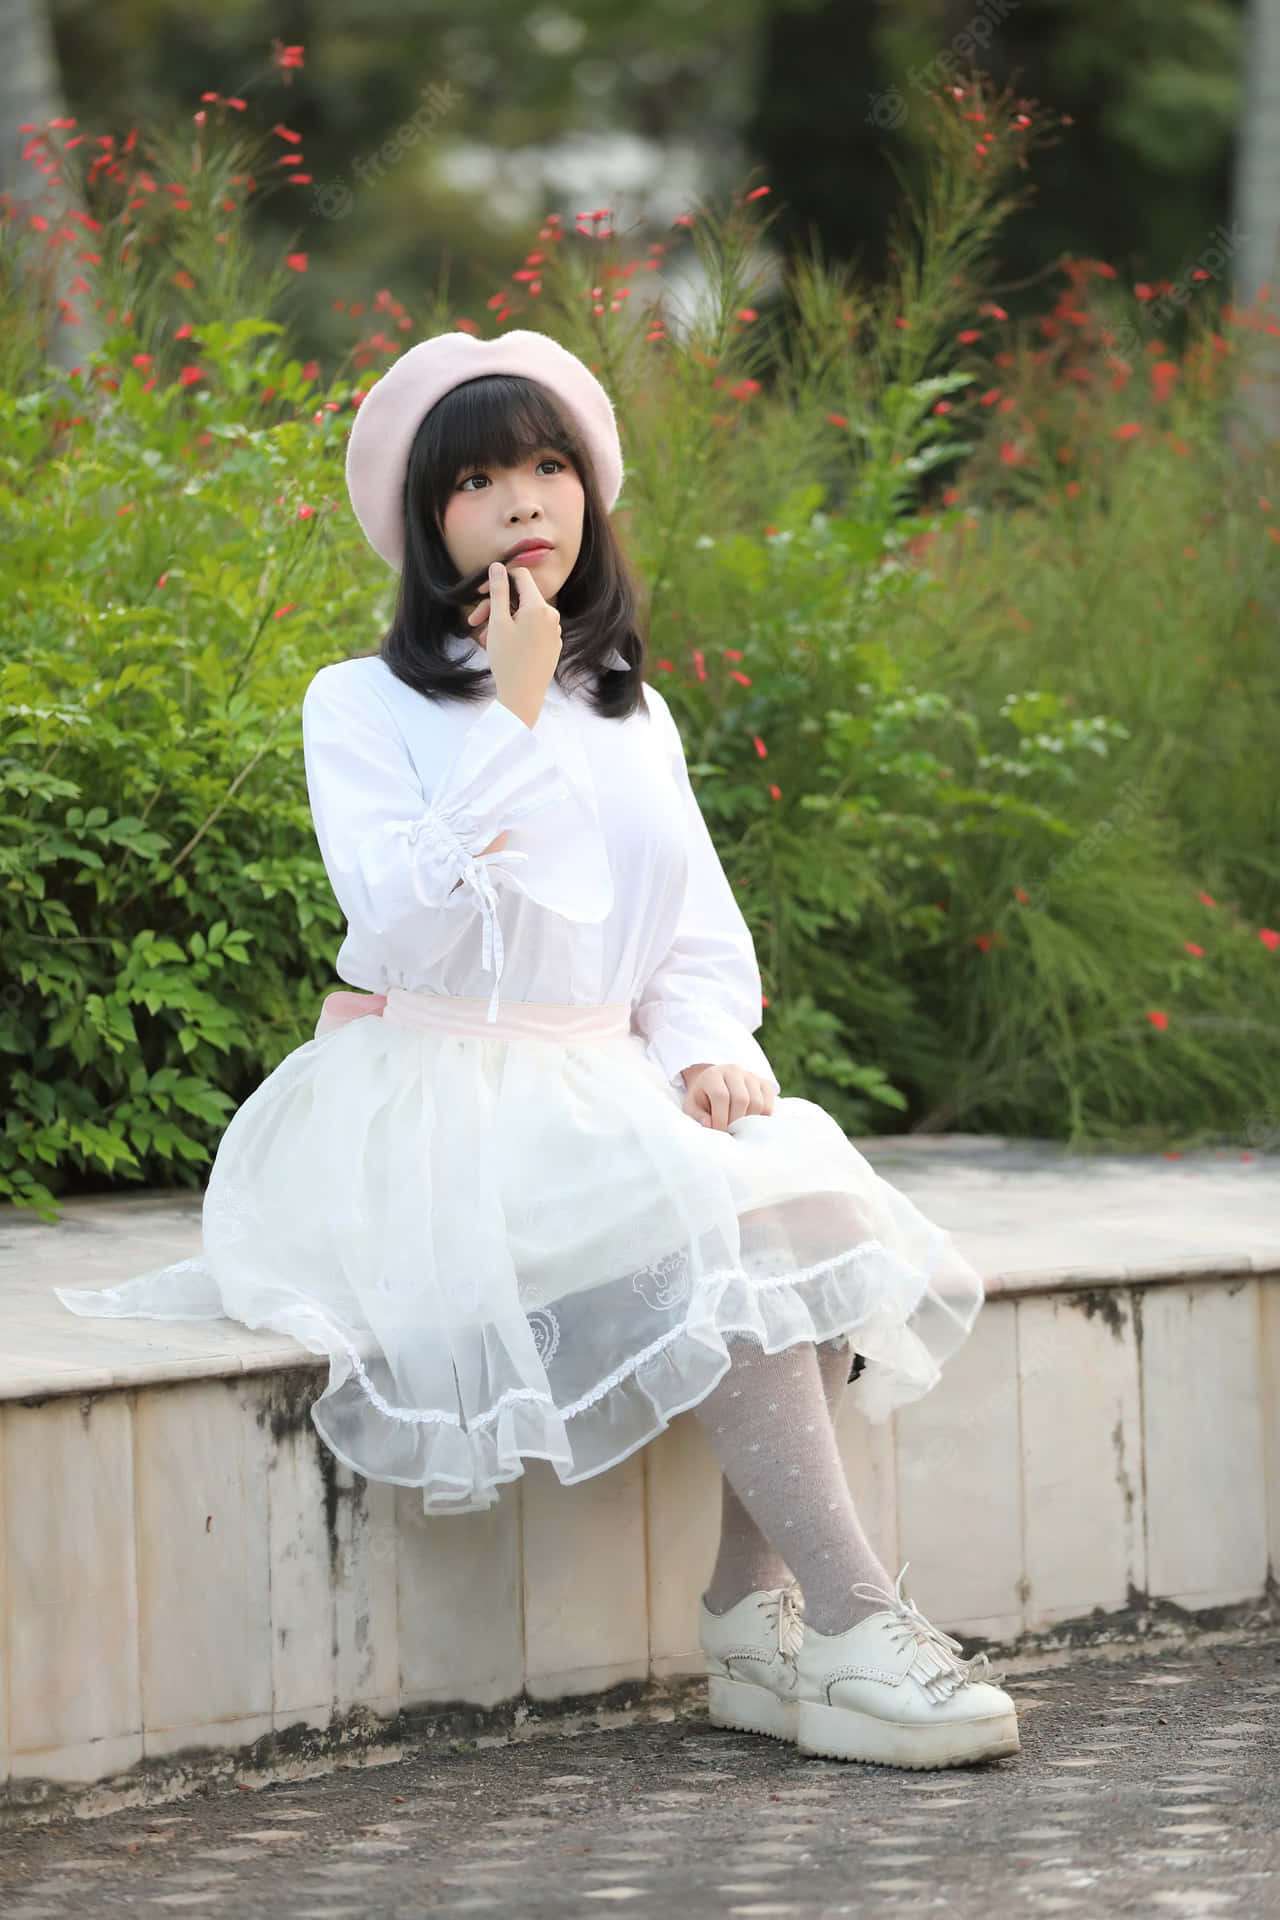 Elegant Lolita Fashionista with Beautiful Floral Accessories and Parasol Wallpaper